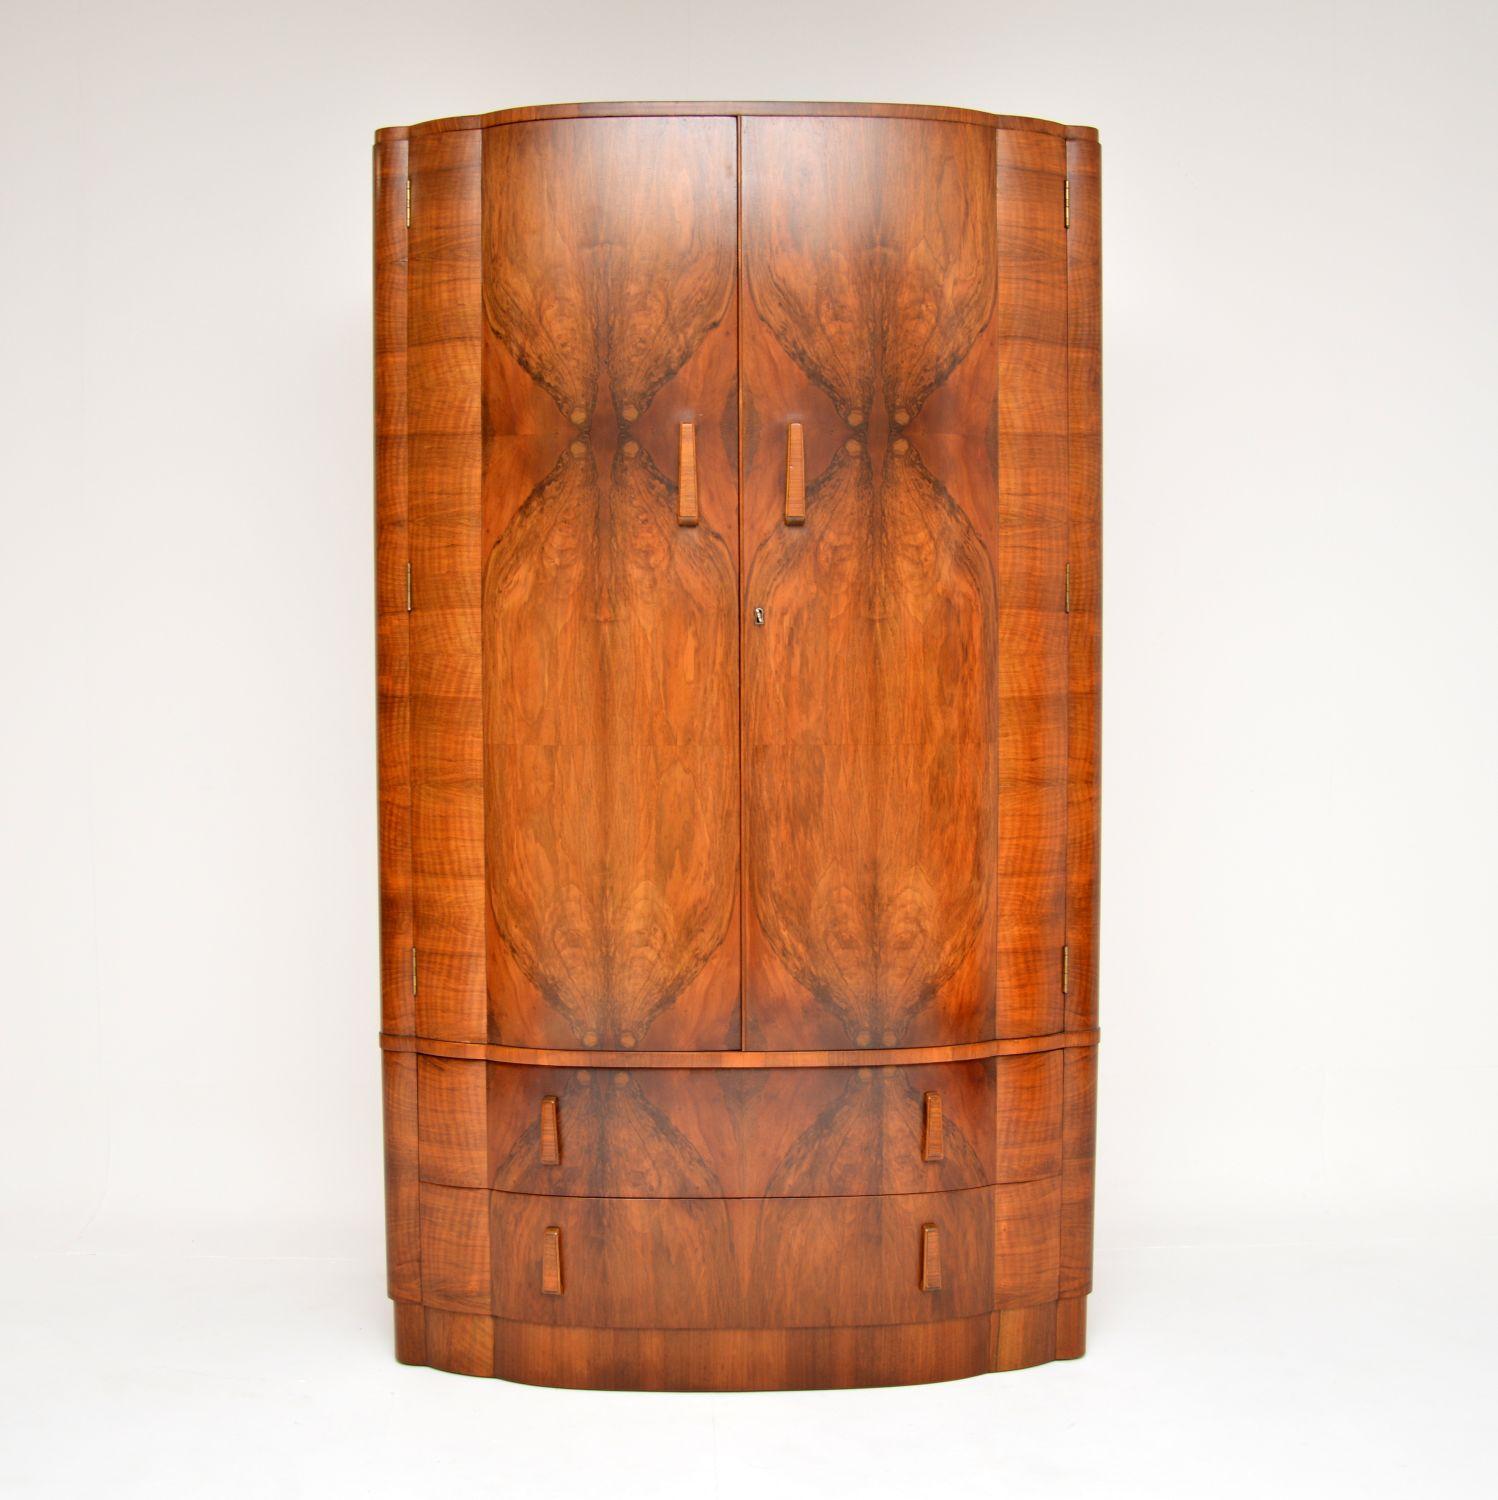 A magnificent original Art Deco period wardrobe in walnut. This was made in England, it dates from the 1930’s.

This is of absolutely superb quality, with beautiful walnut grain patterns and a gorgeous colour tone. The two door top section opens